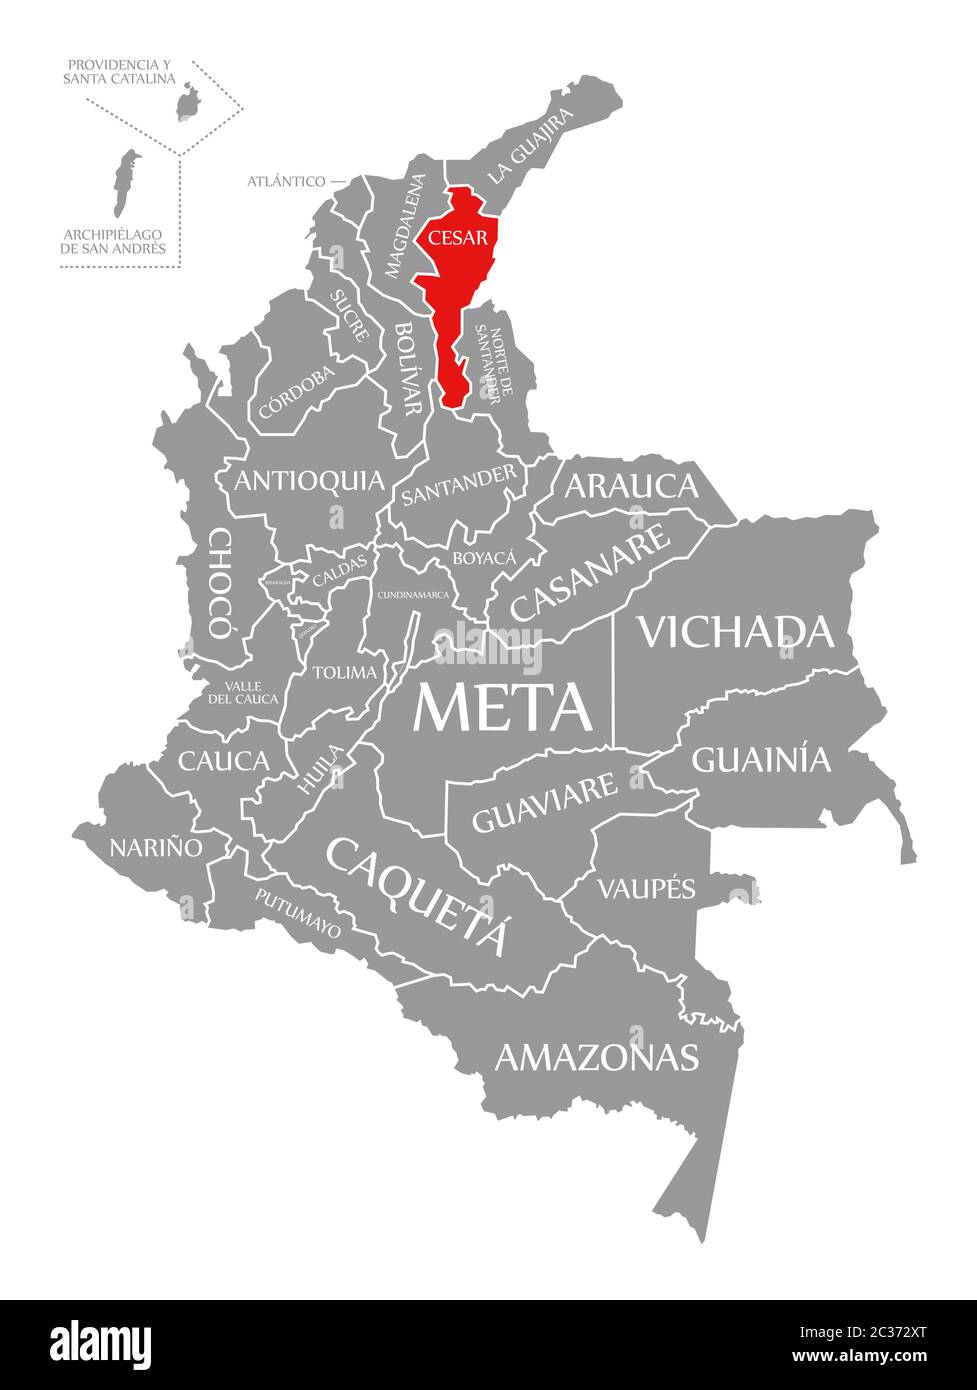 Cesar red highlighted in map of Colombia Stock Photo